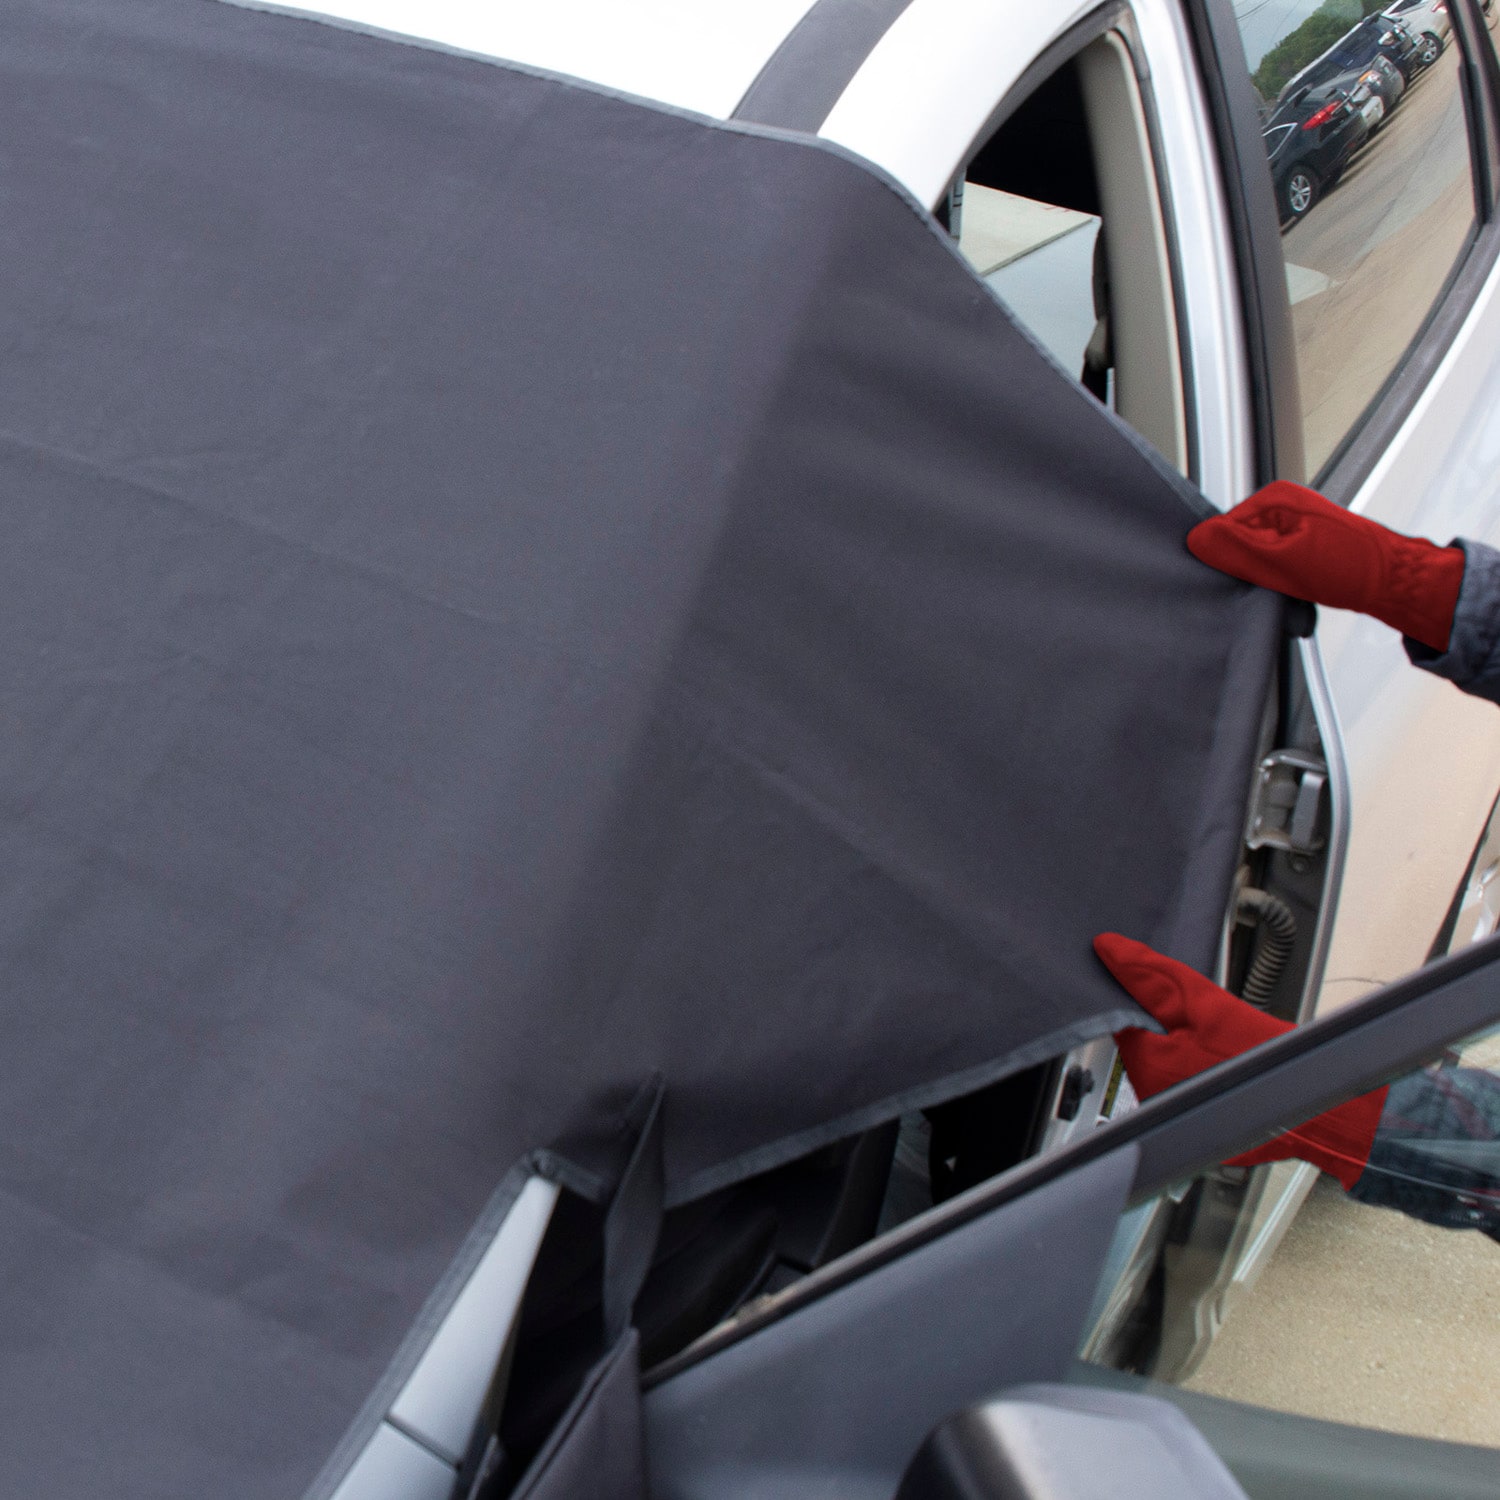 Hopkins Arctic Defense Windshield Cover in the Exterior Car